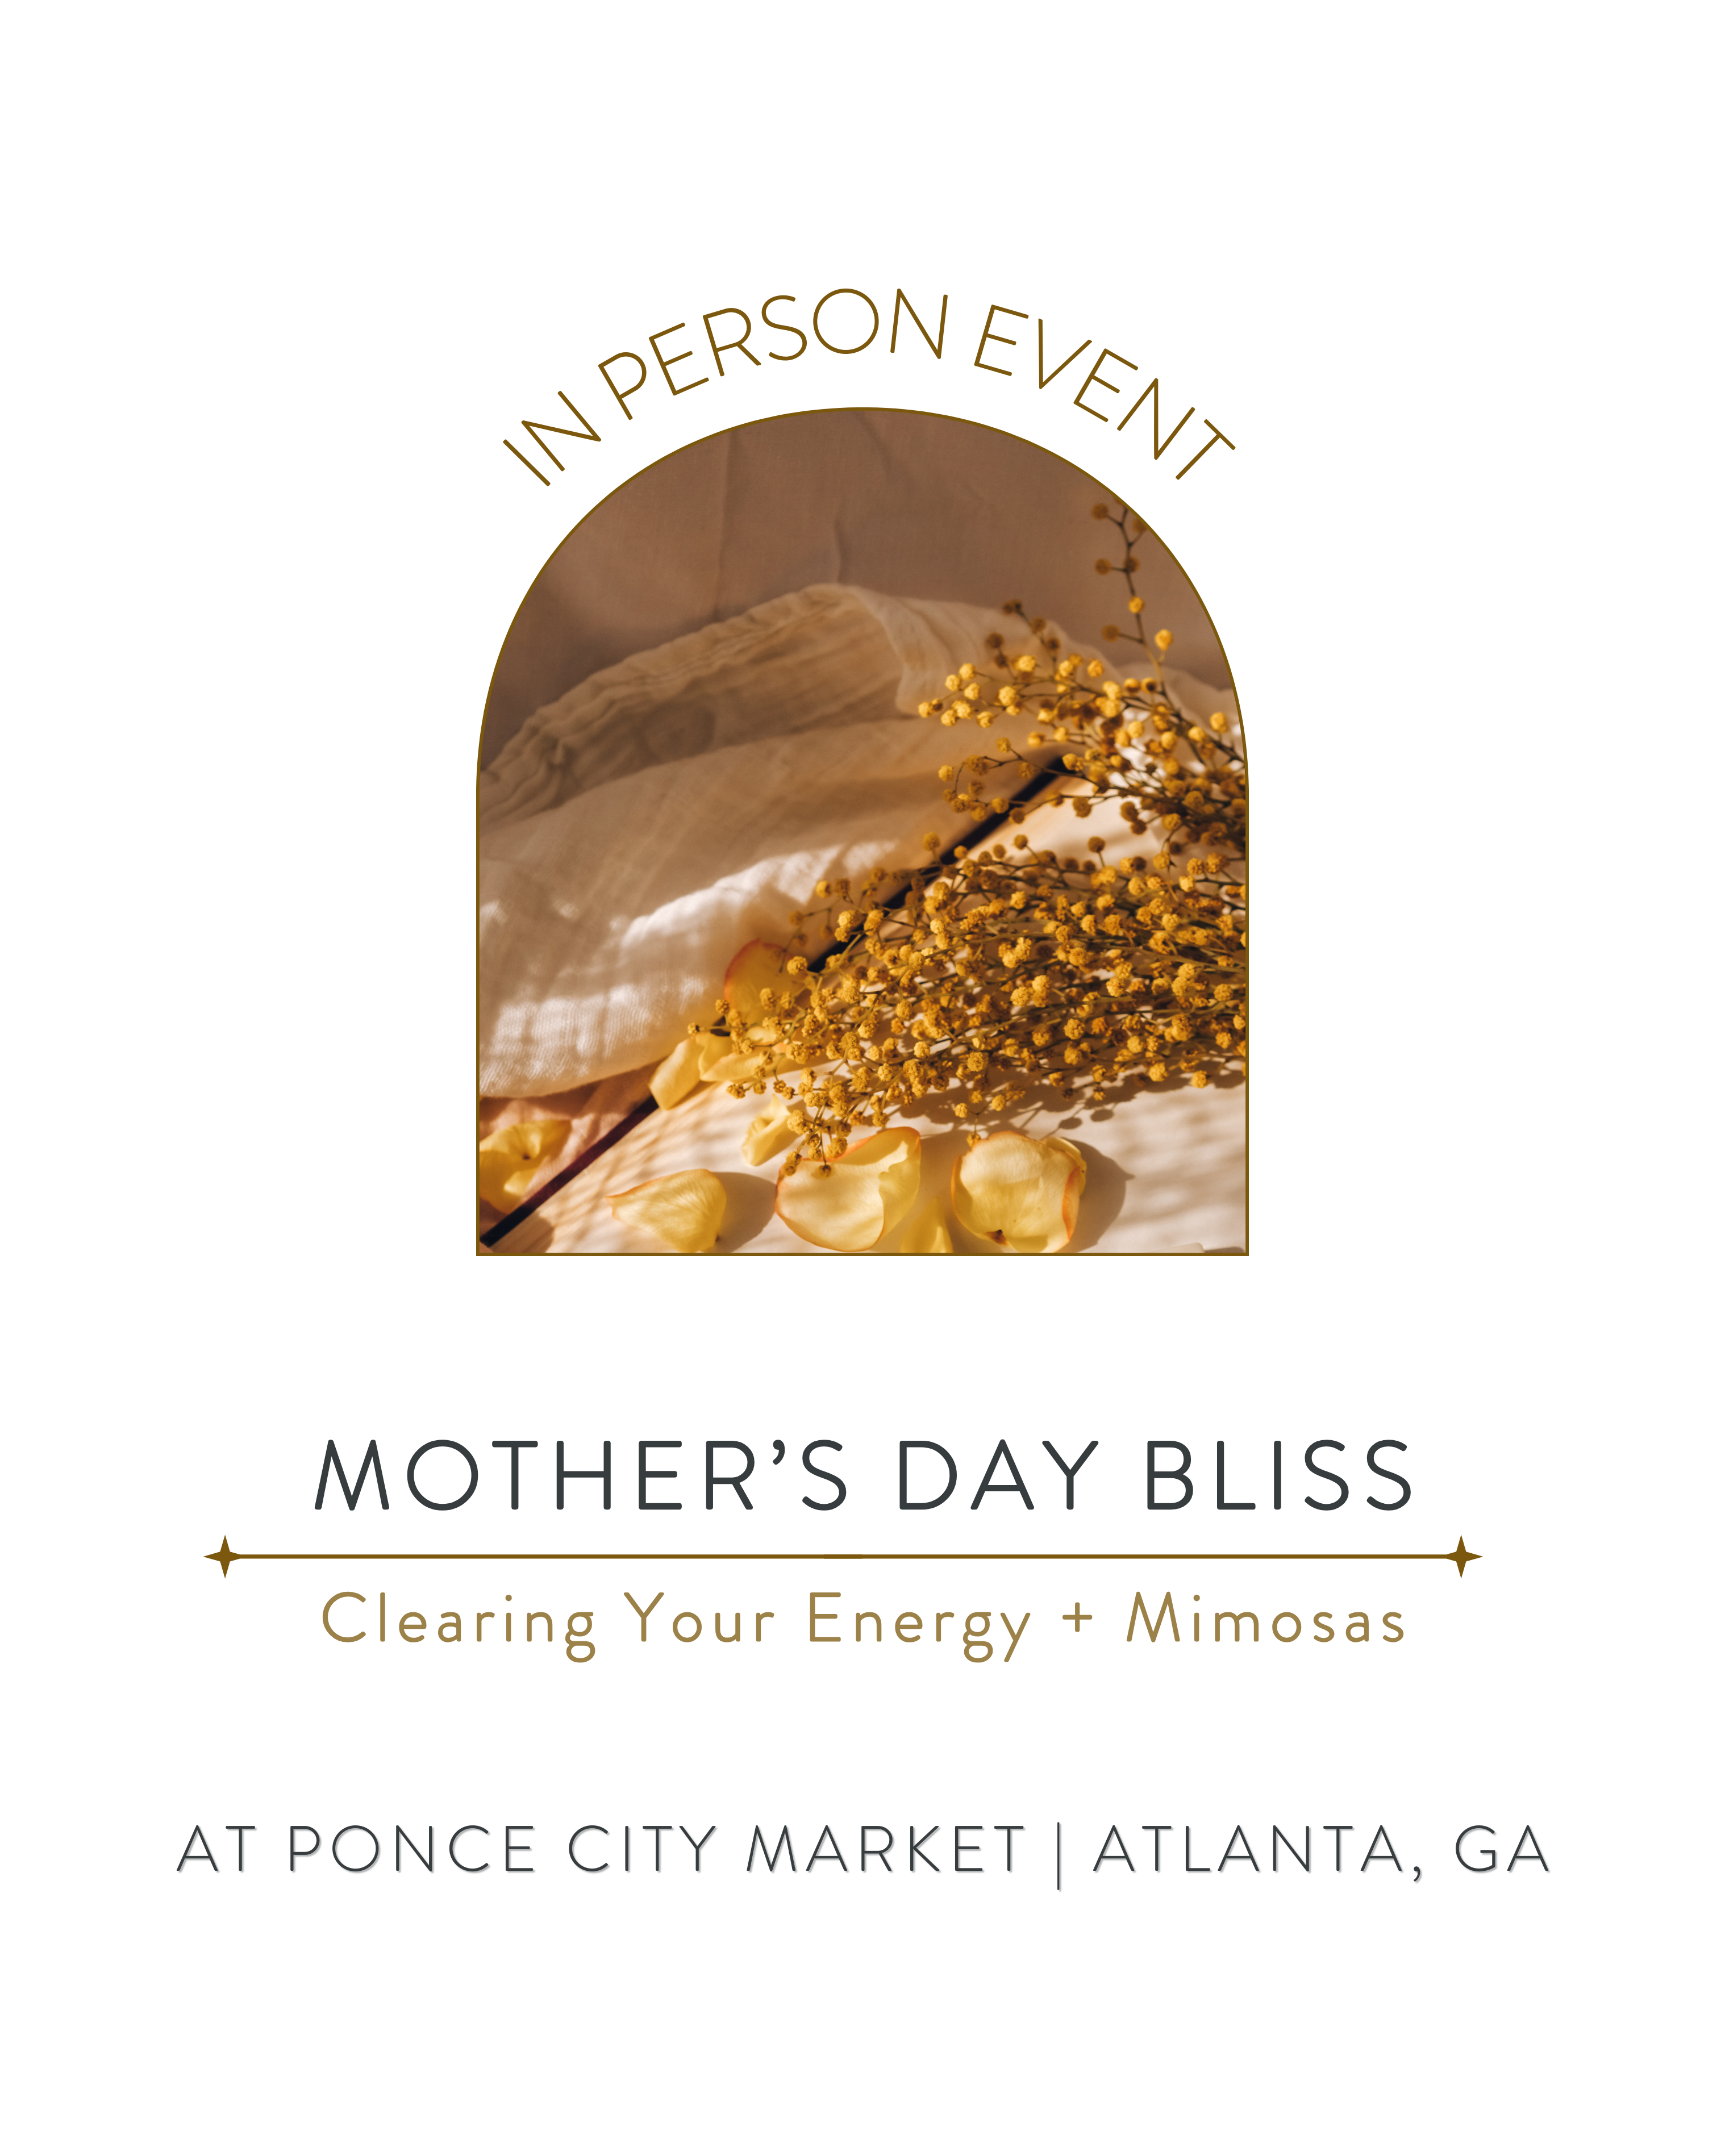 Mother's Day Bliss Event